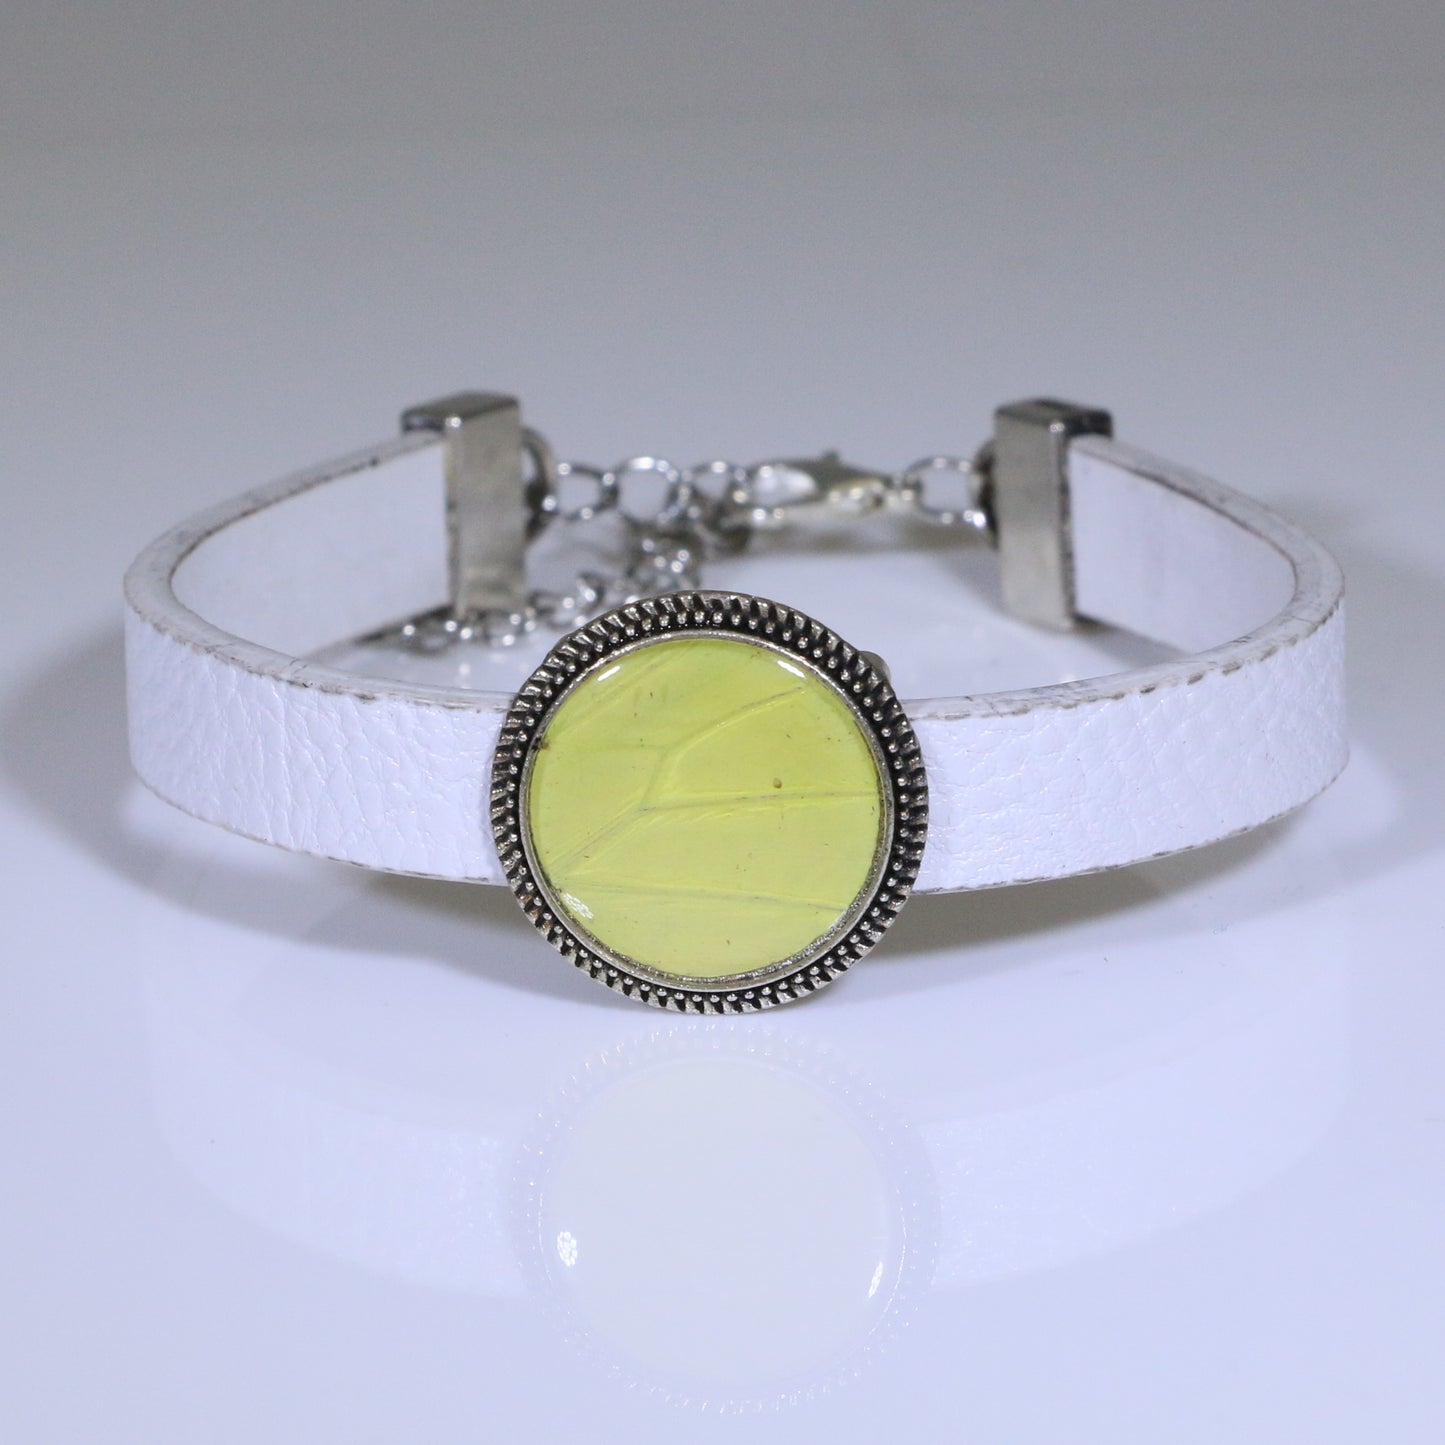 53306 - Real Butterfly Wing Jewelry - Bracelets - Round - Small - White - Hebomia - Yellow